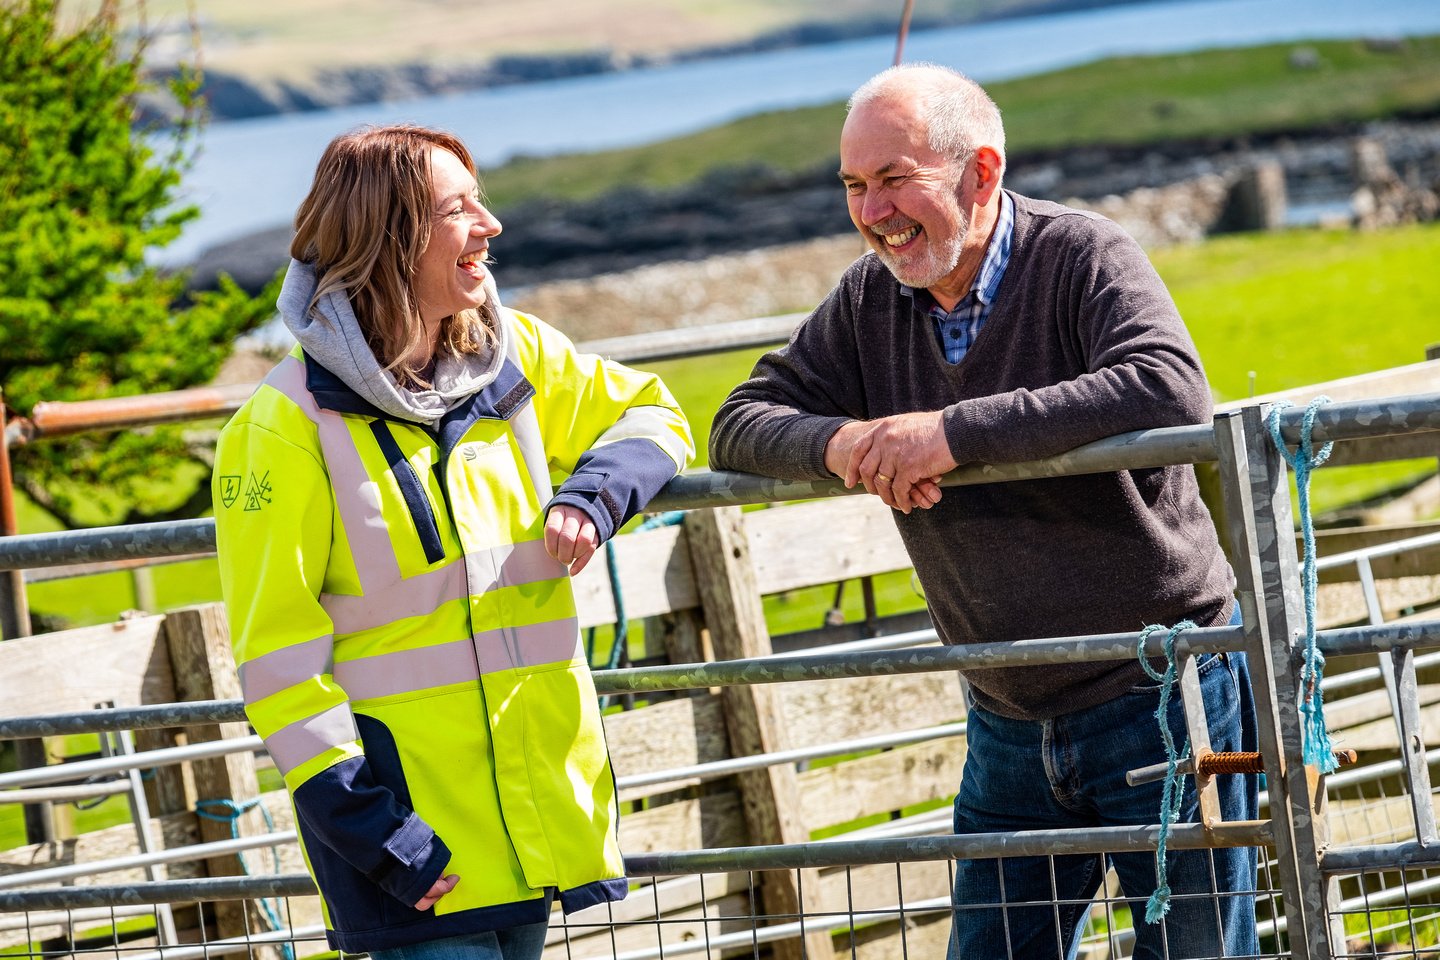 Sharon Powell, our Shetland Community Liaison Manager, speaks with a member of the local community by a fence.